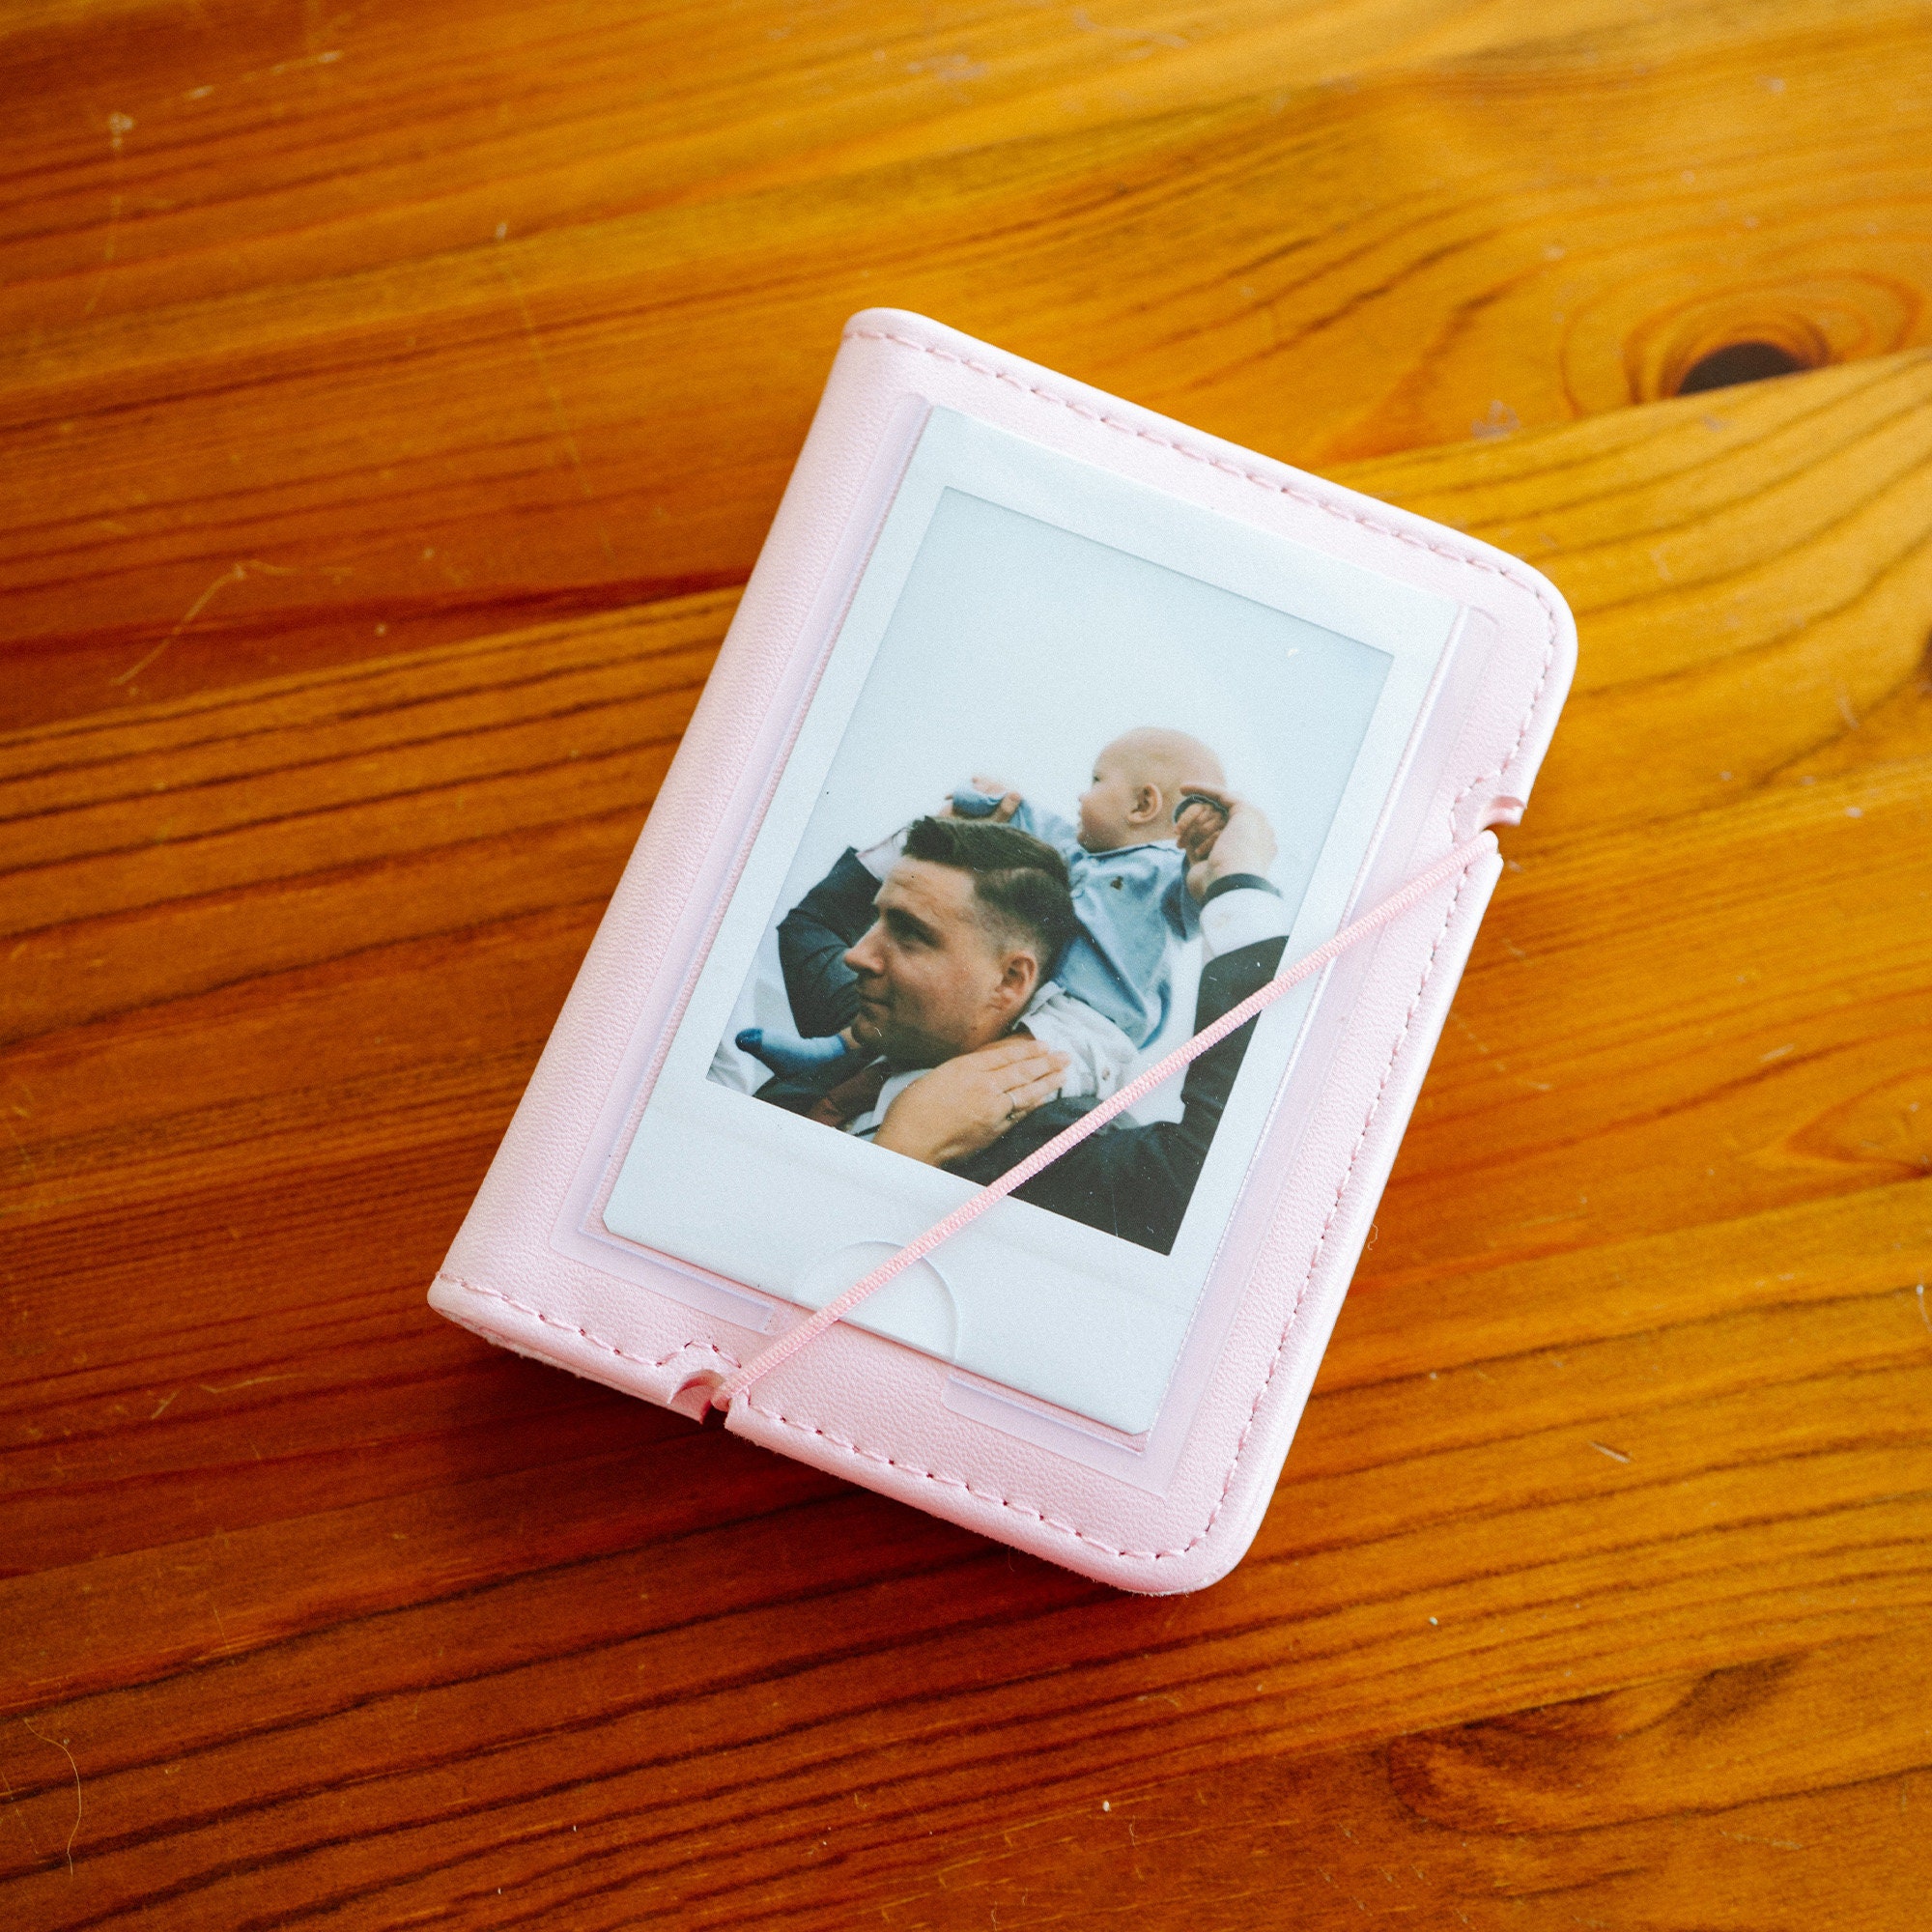 Snapshots: The No-nonsense Scrapbook – Prints From My Instax